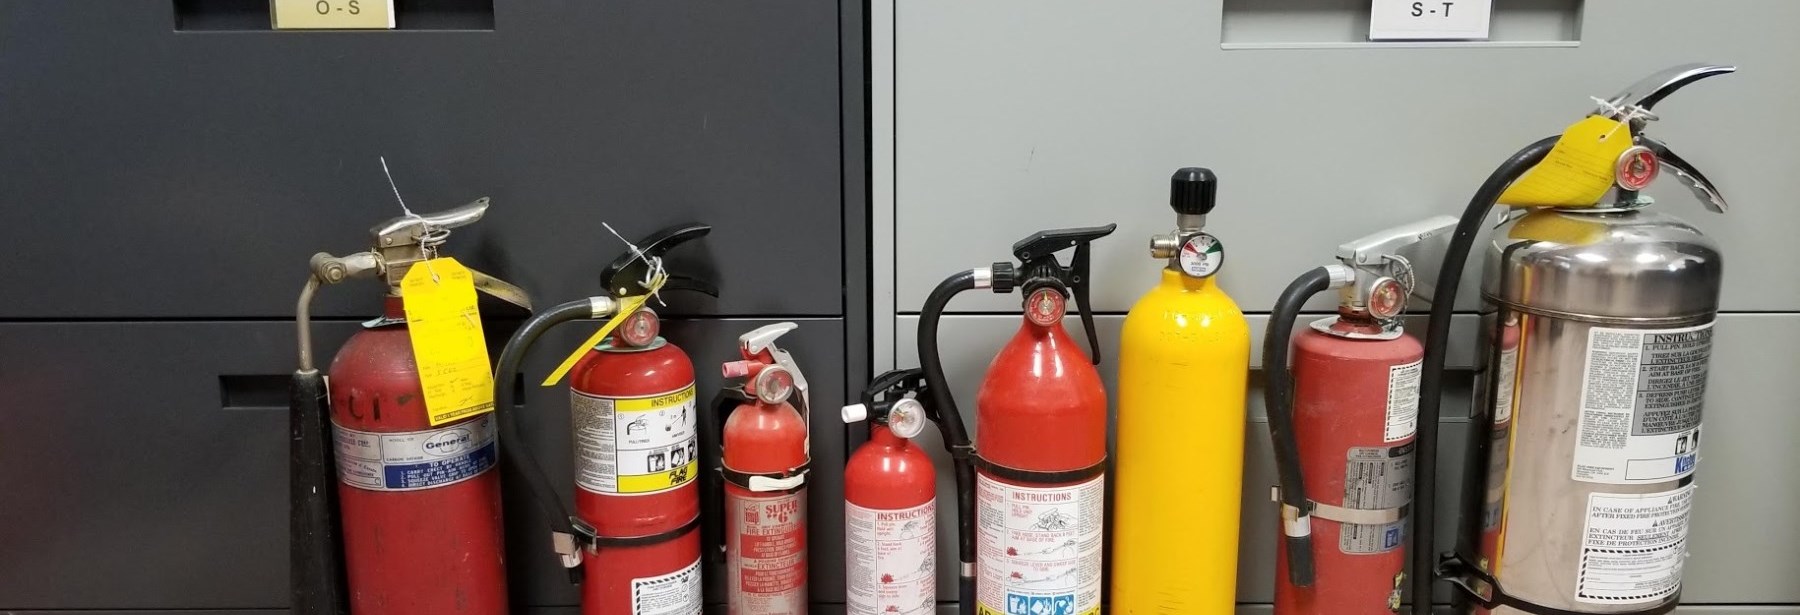 several extinguishers standing on the floor in a row varying sizes